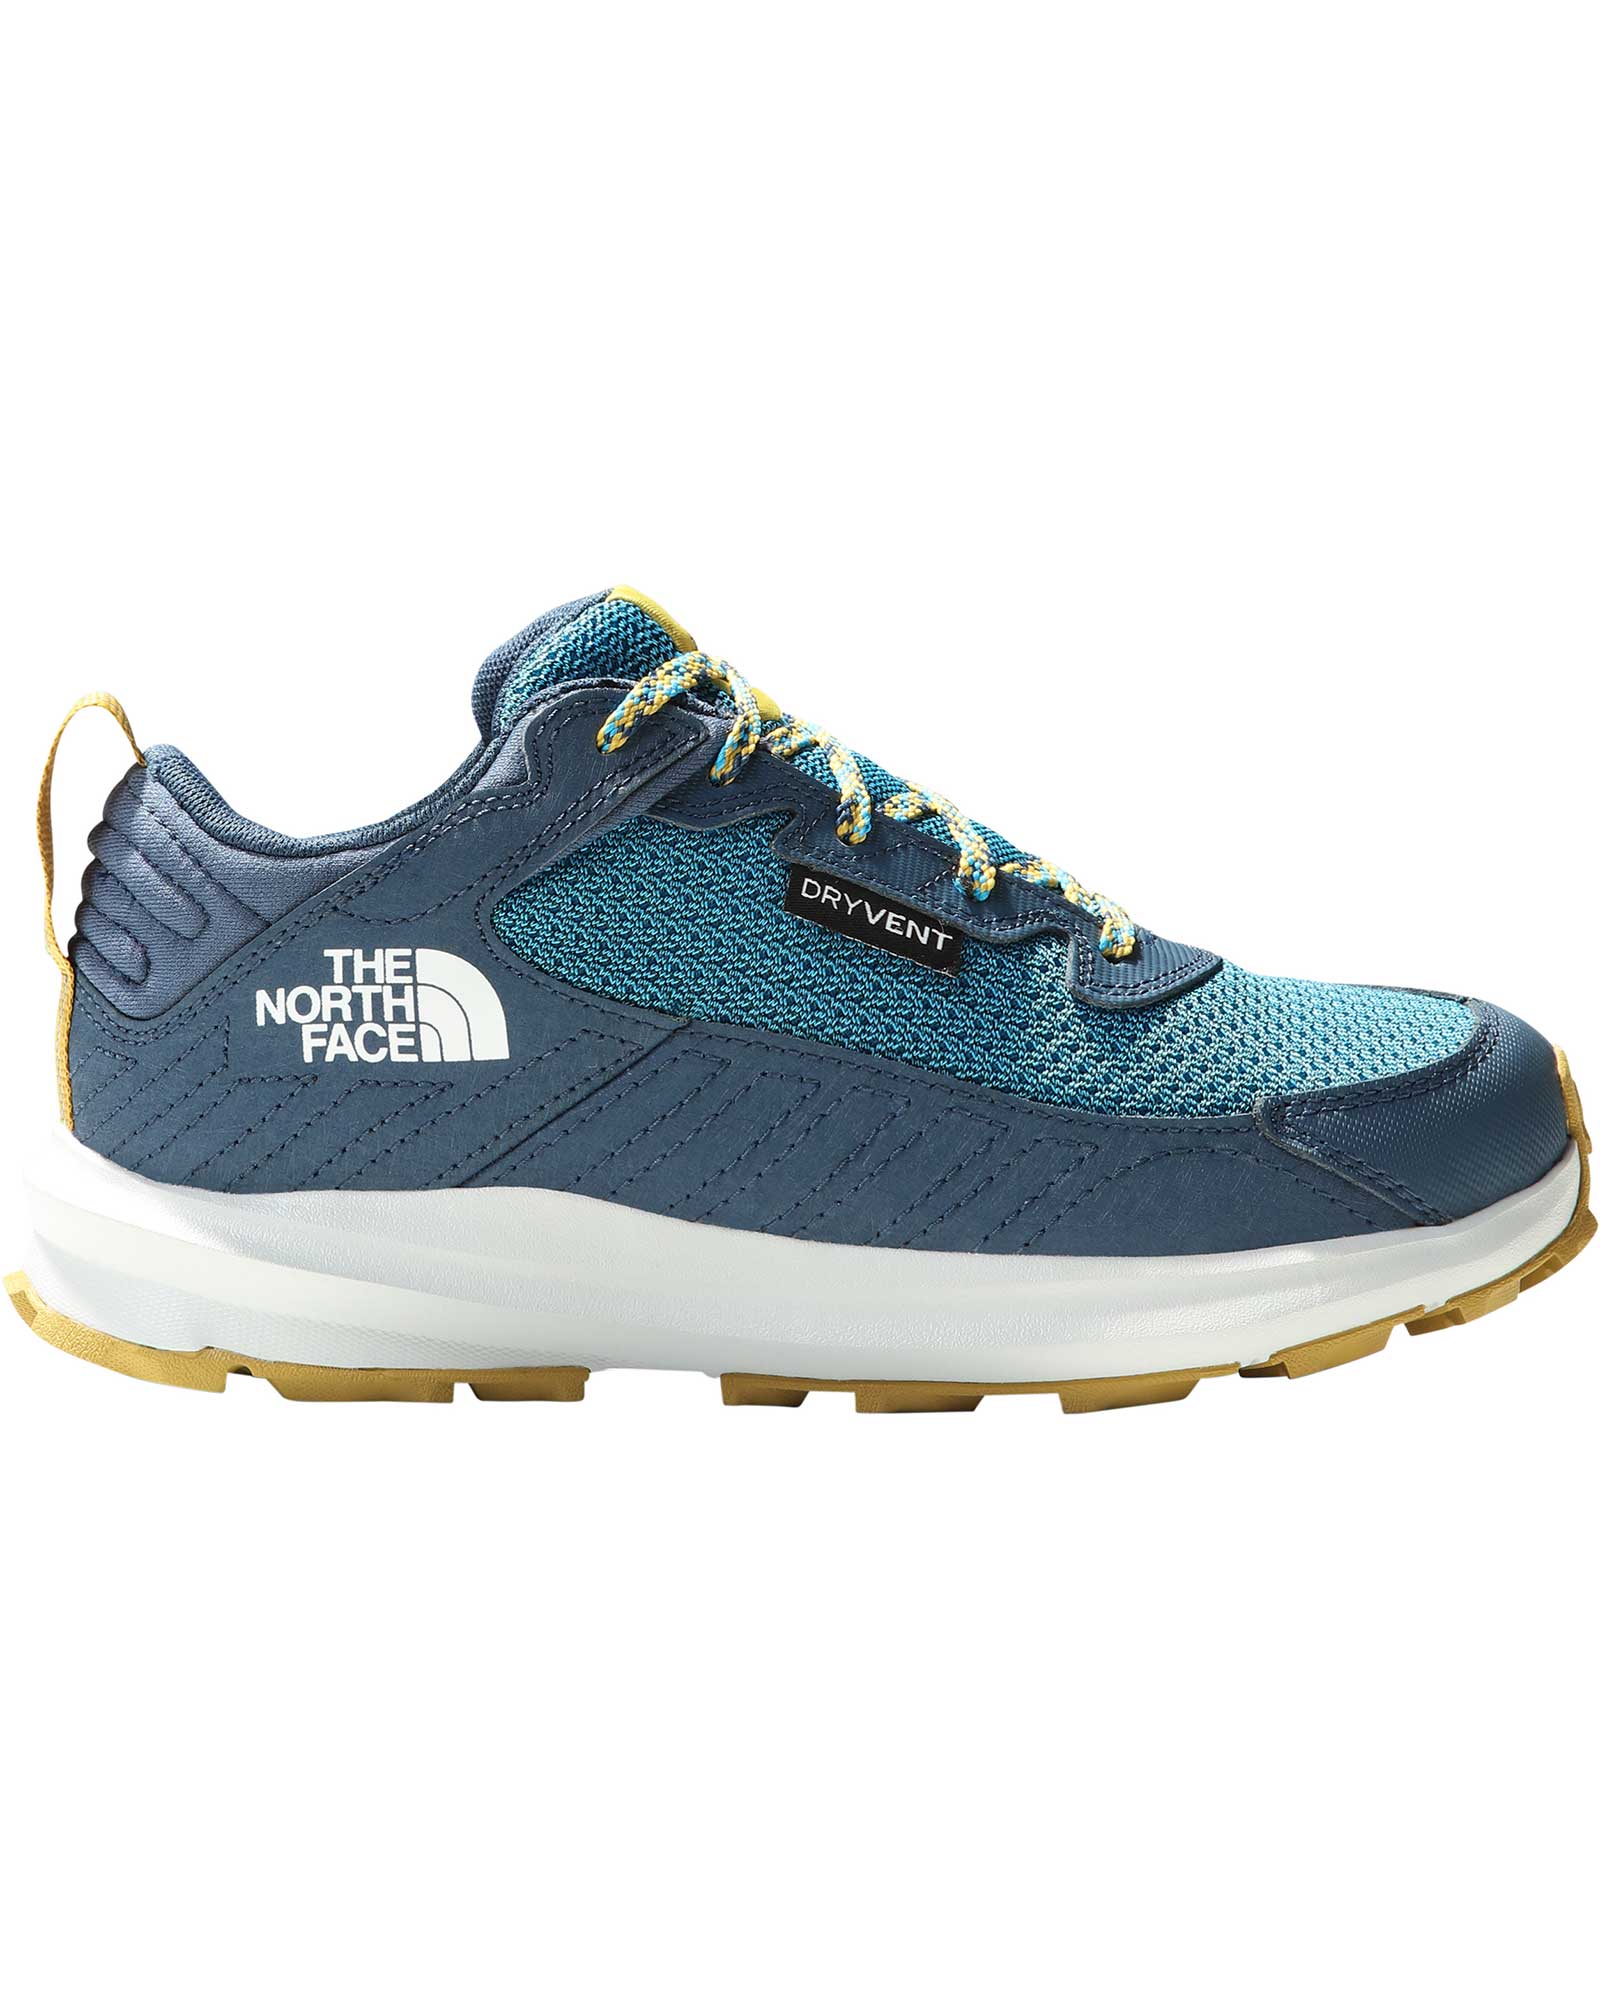 Product image of The North Face Youth Fastpack Hiker Waterproof Kid's Shoes